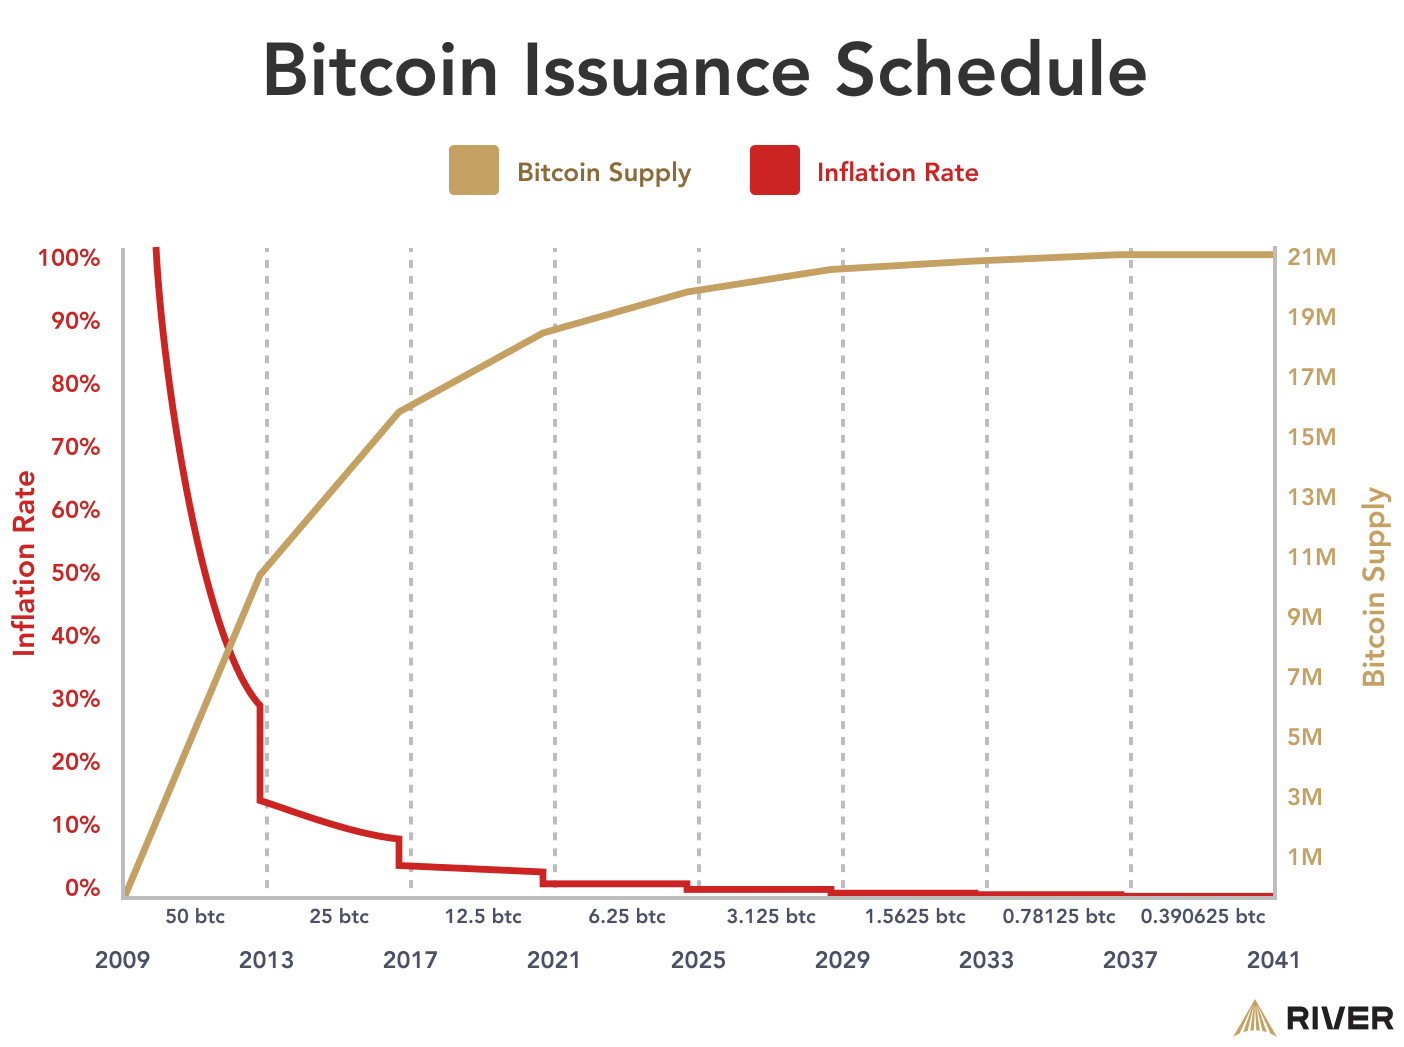 Bitcoin&rsquo;s inflation rate is precisely known, both at the present and into the future.